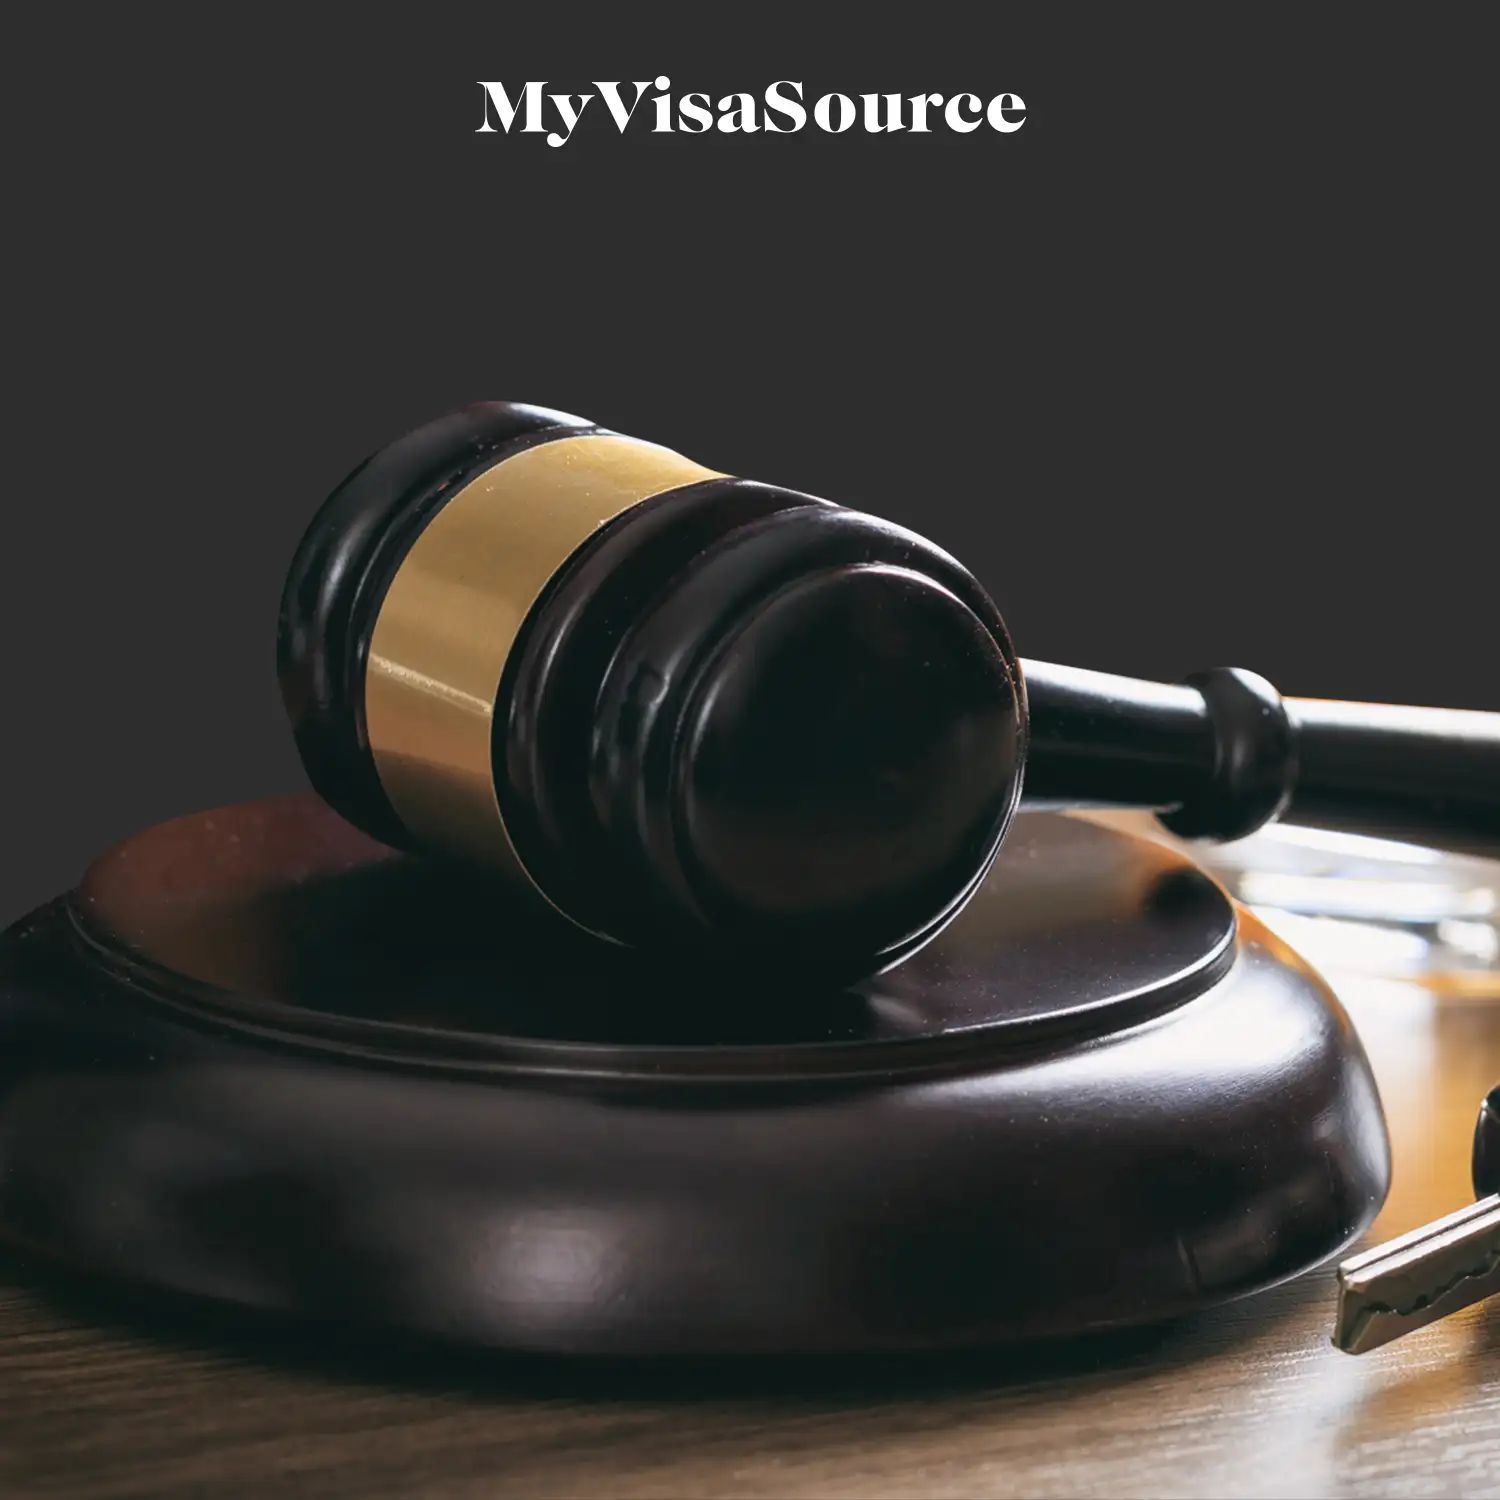 gavel on a stand on dark brown background by my visa source